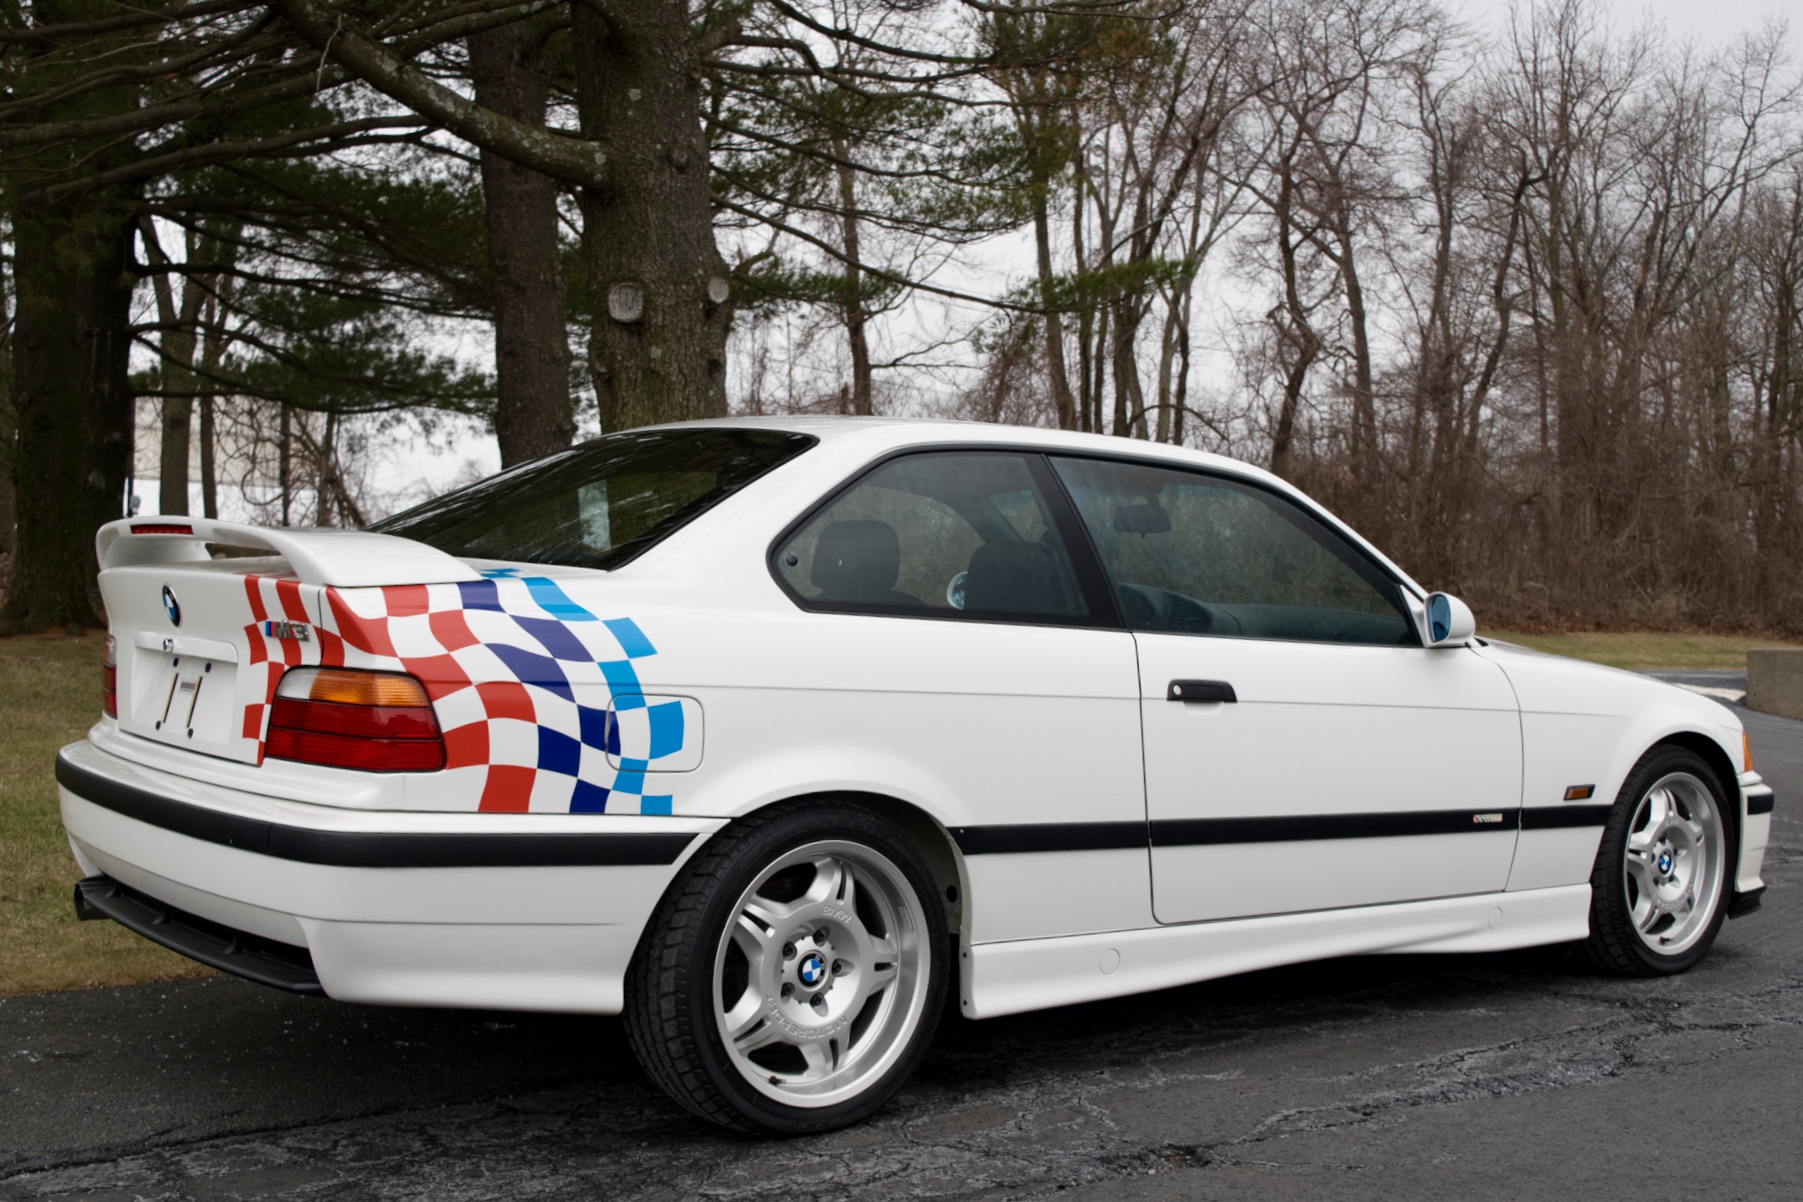 Would Spend You $100k On 12 Year Old BMW E36 M3 Lightweight With 100 Miles ...